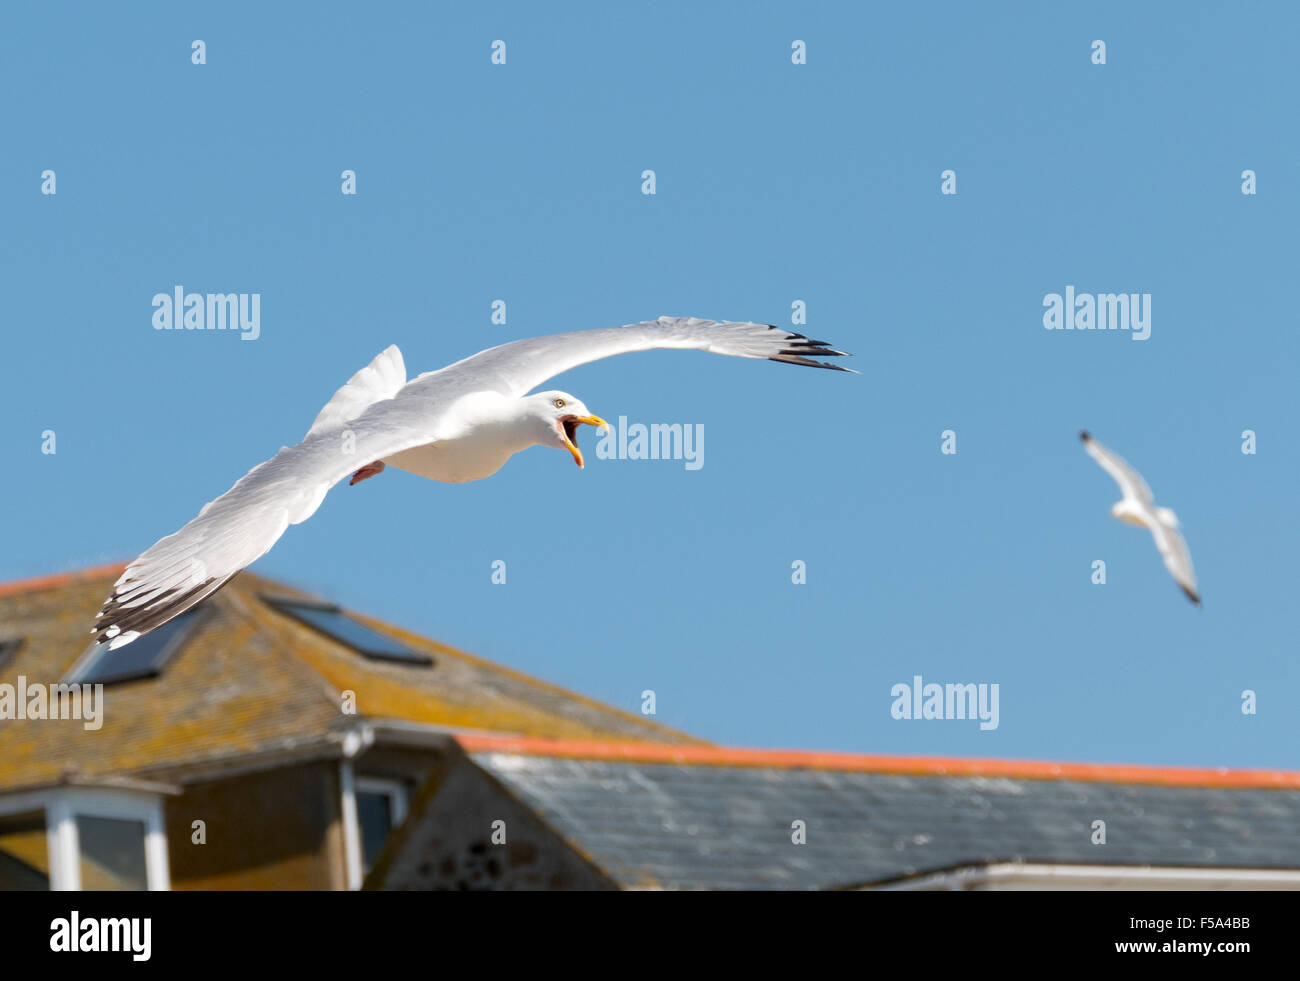 Seagull flying and squawking with beak open over St. Ives, Cornwall England. Stock Photo